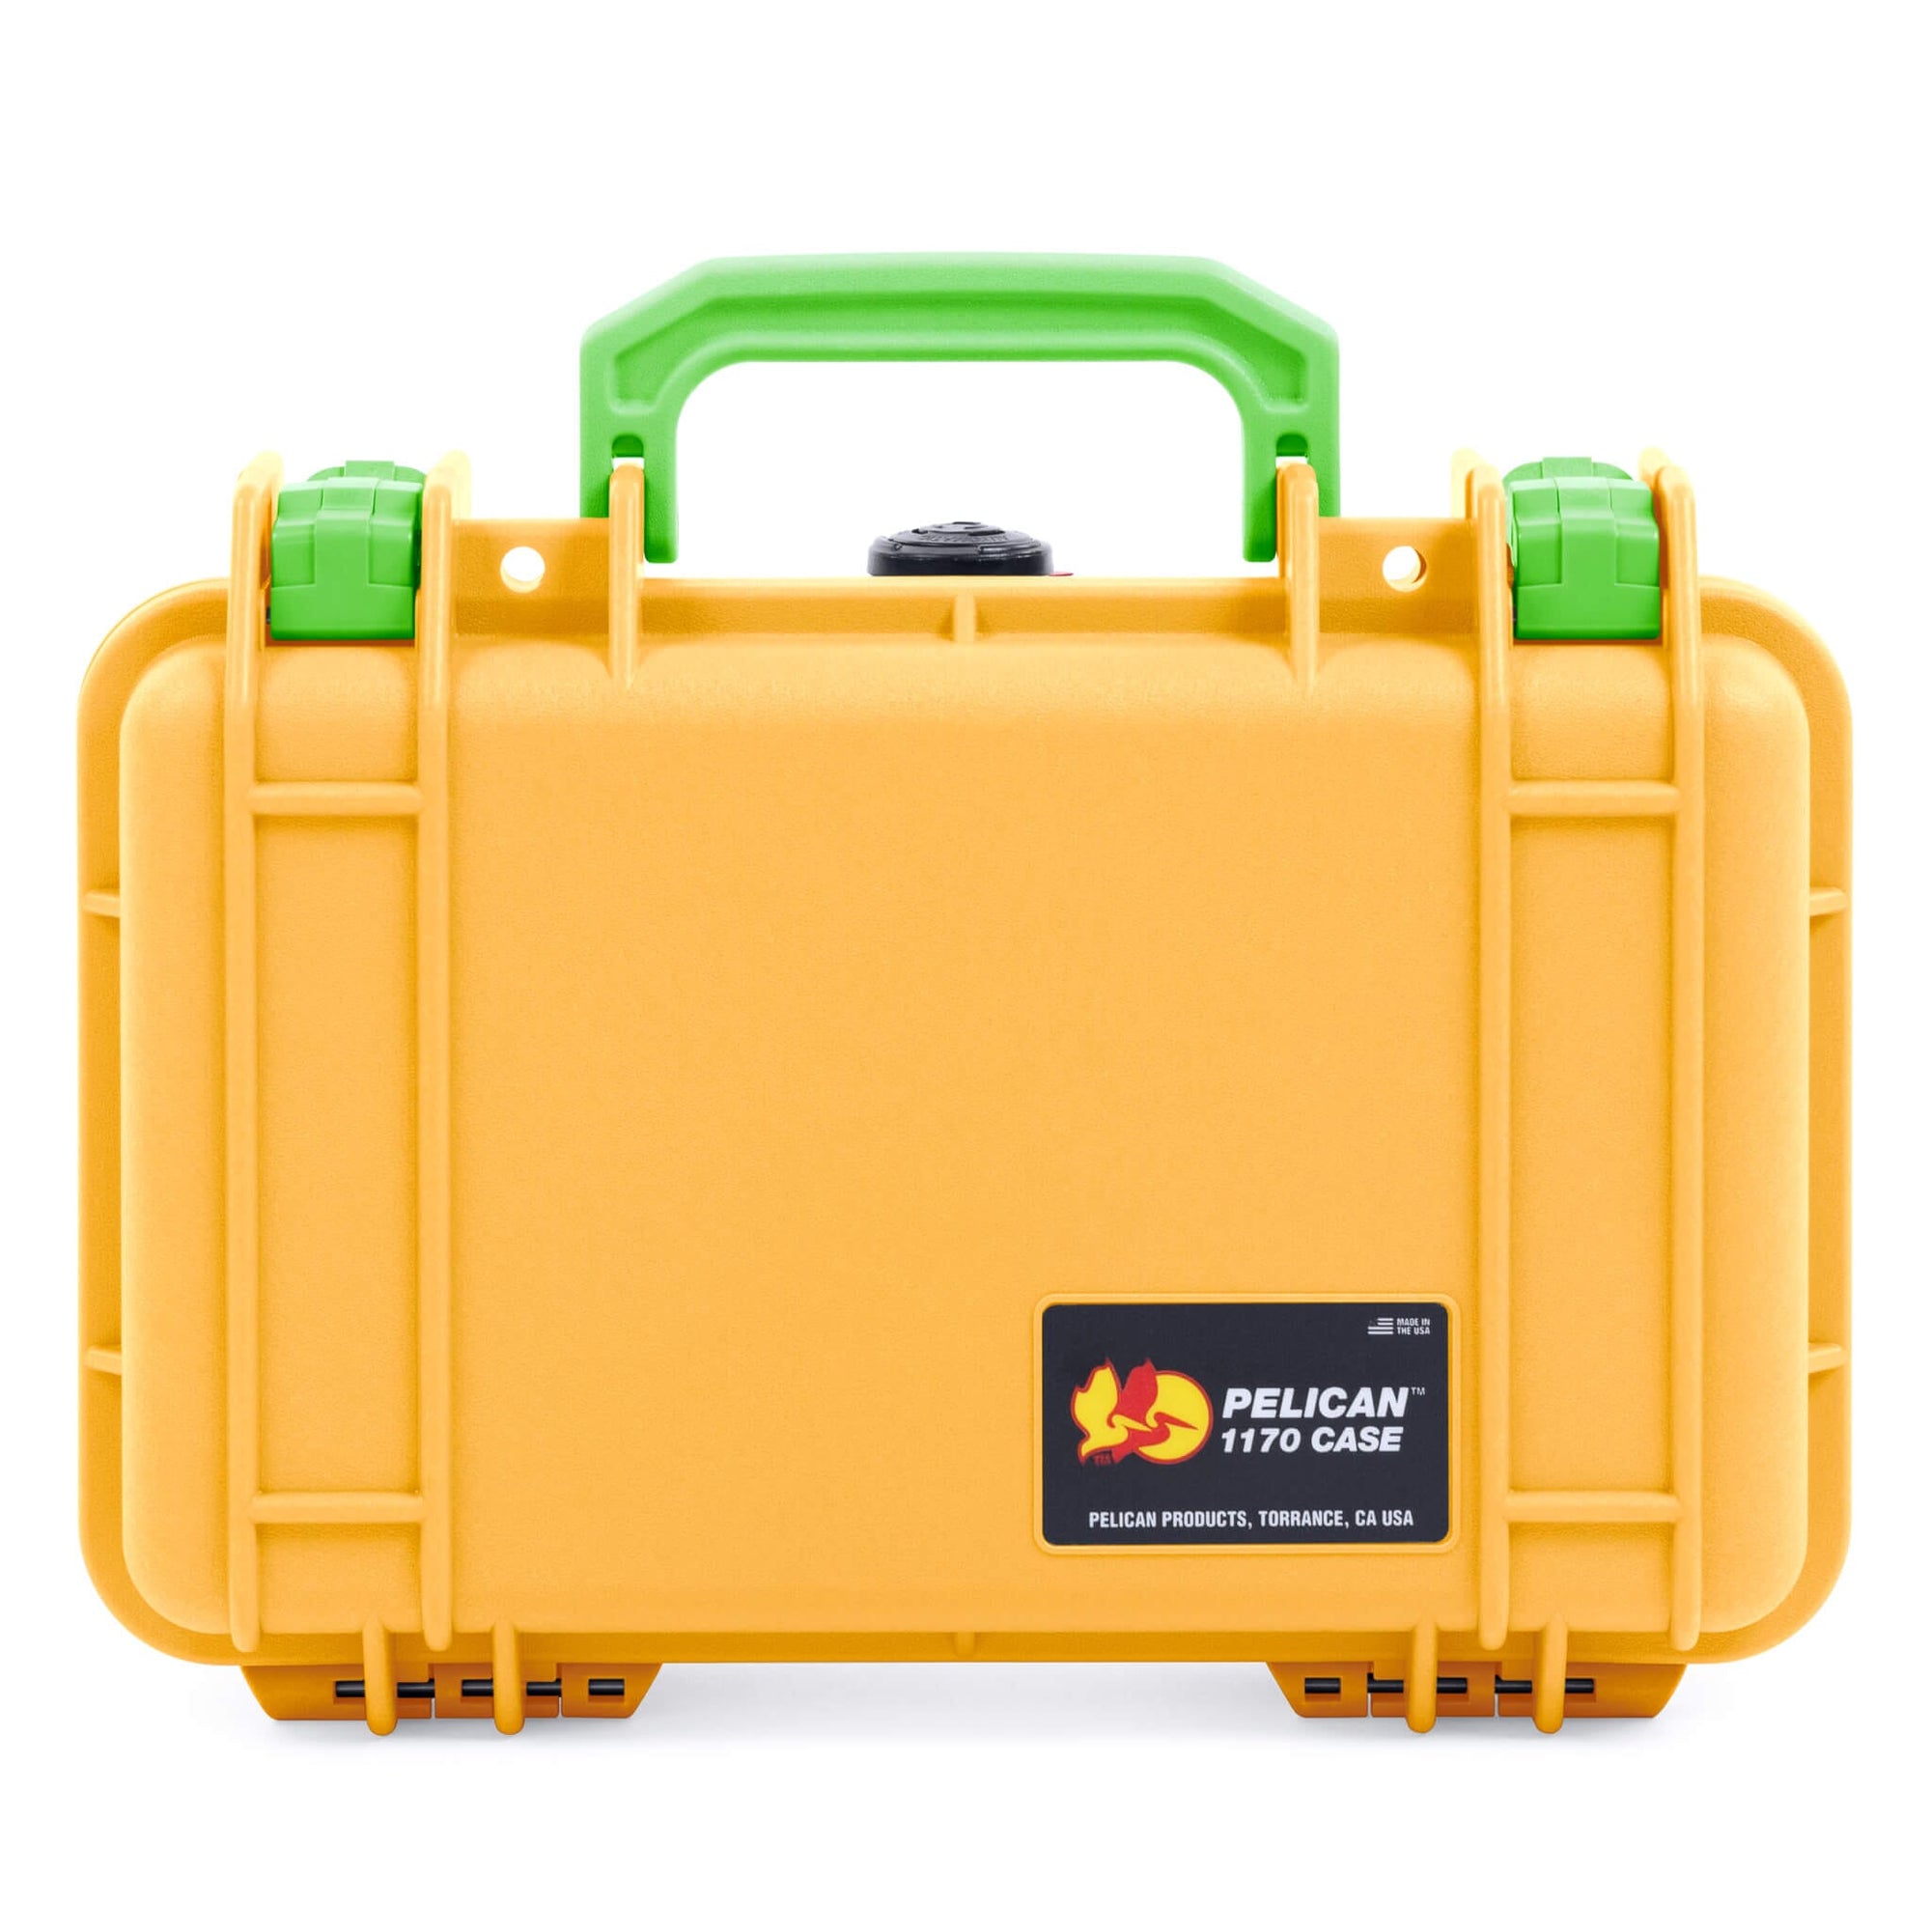 Pelican 1170 Case, Yellow with Lime Green Handle & Latches ColorCase 